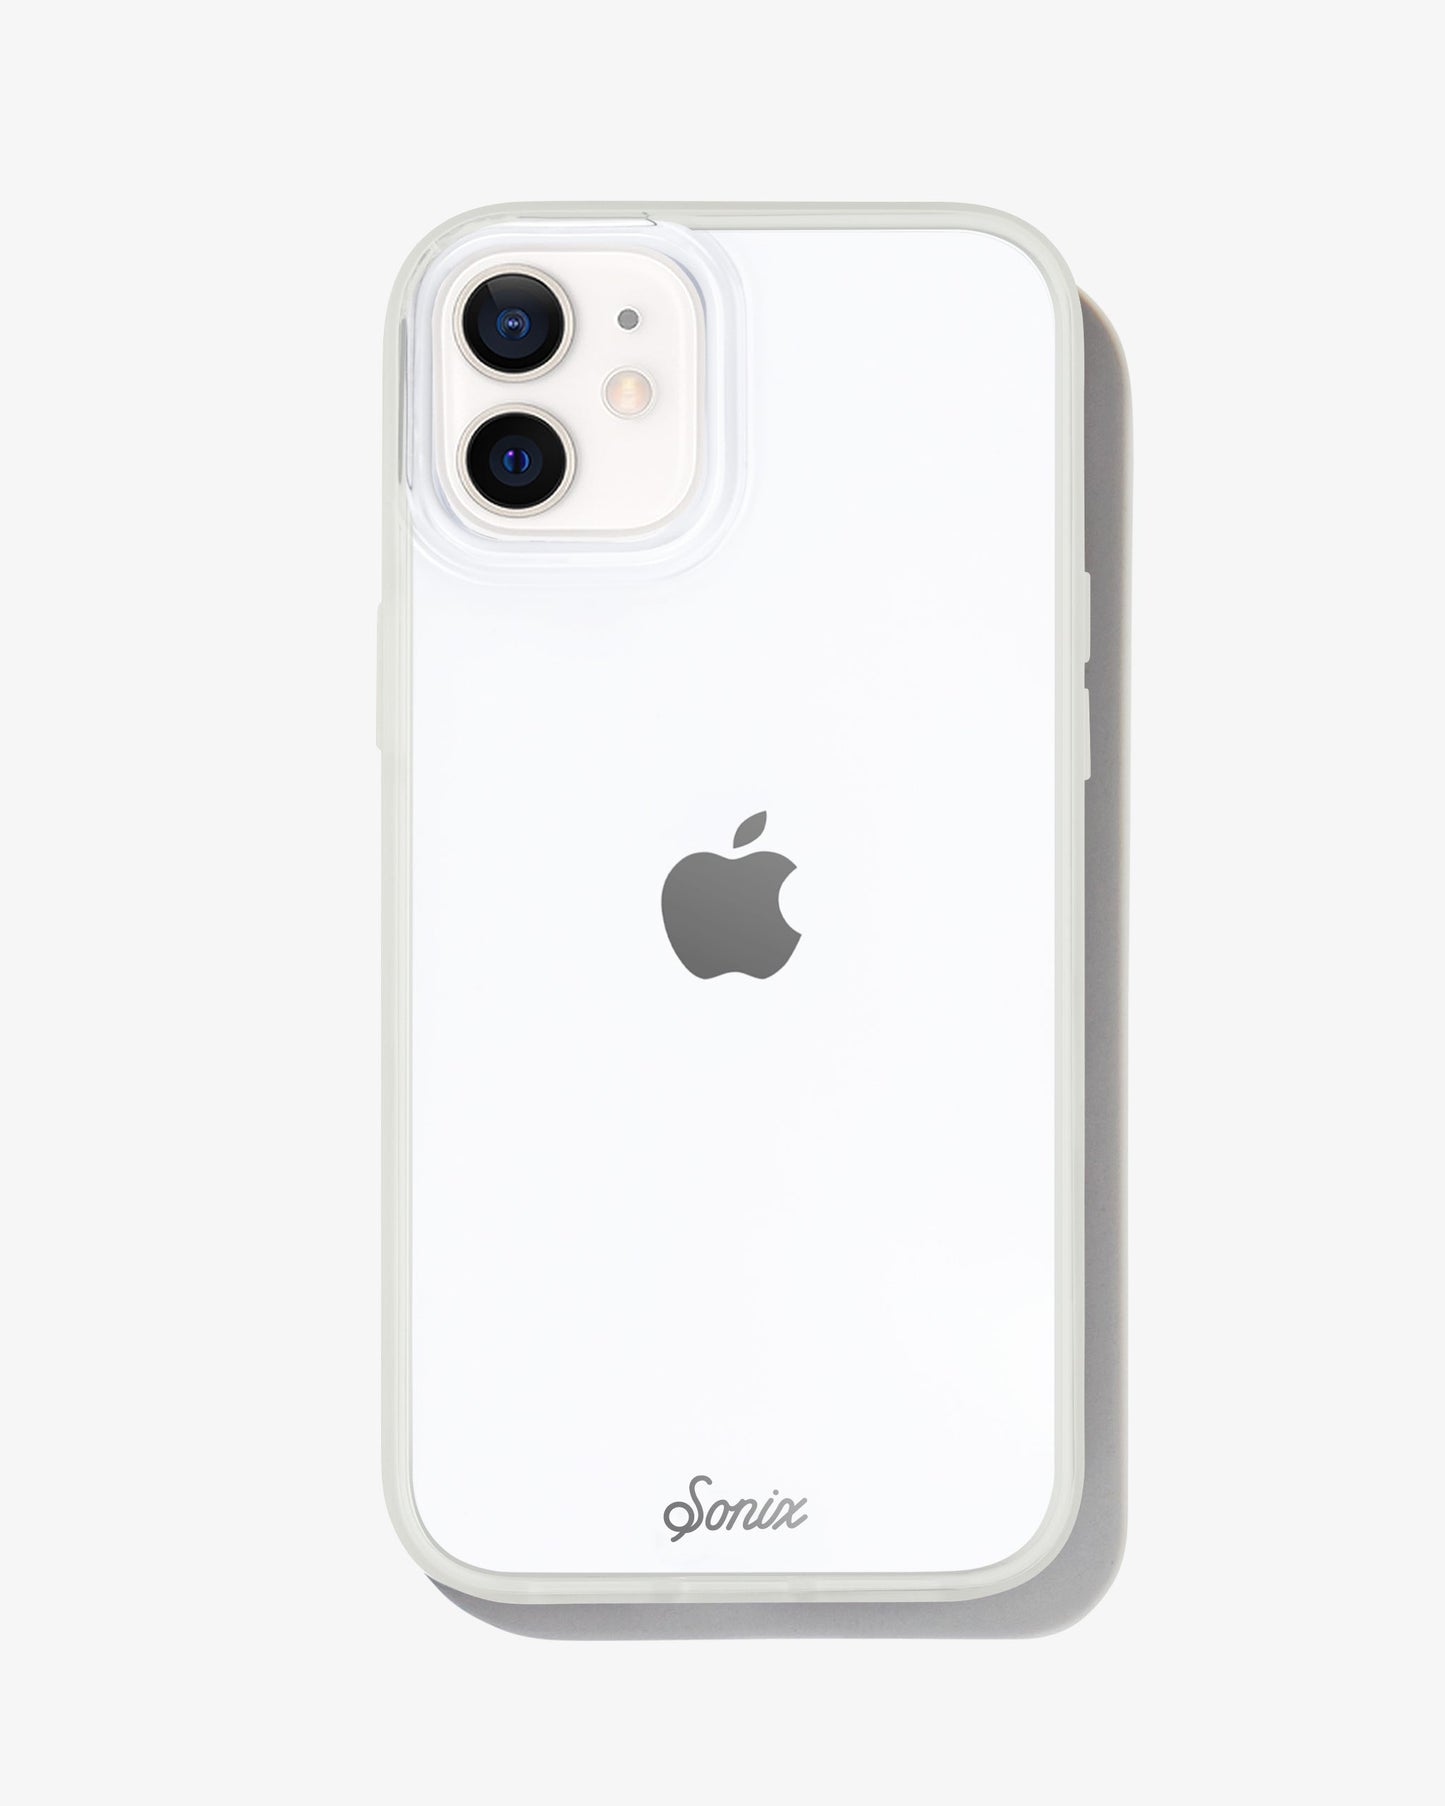 a clear case featuring a glow-in-the-dark bumper shown on an iphone 12